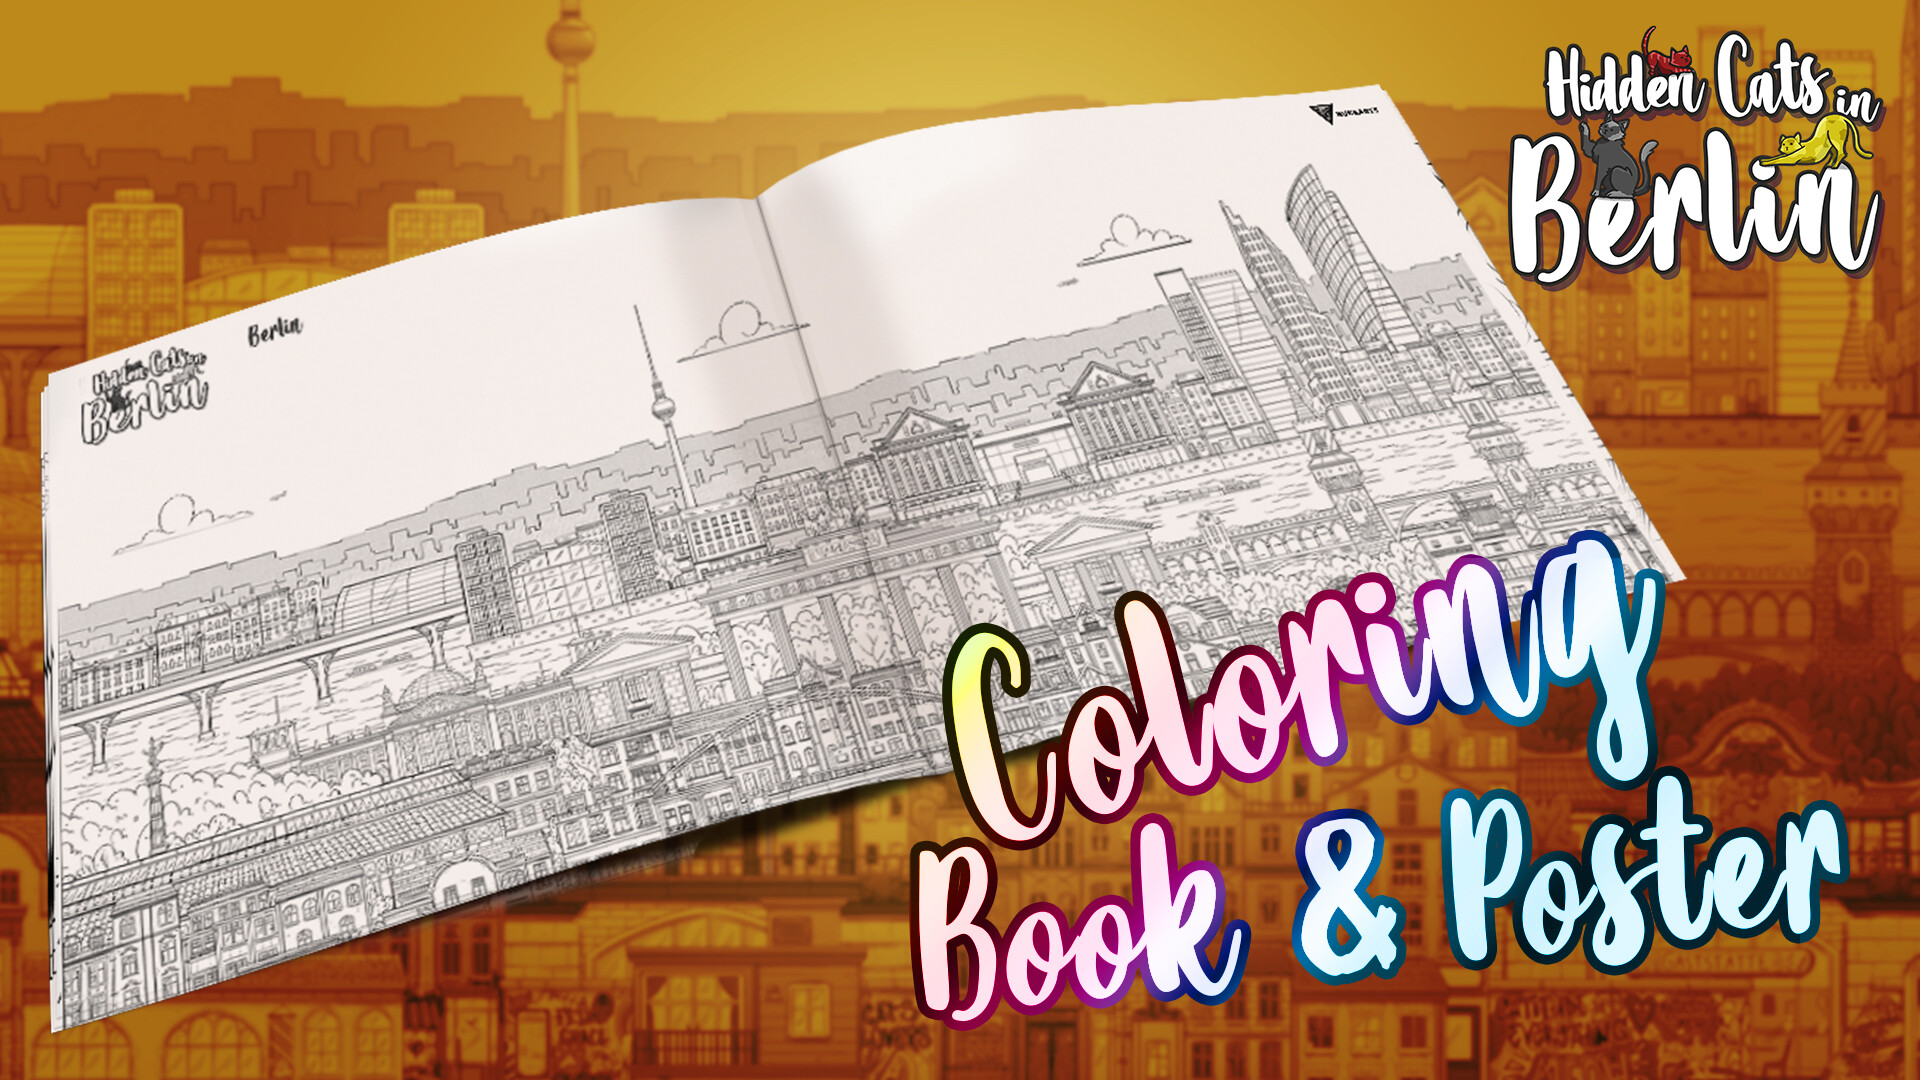 Hidden Cats in Berlin - Printable PDF Coloring Book and Poster Featured Screenshot #1